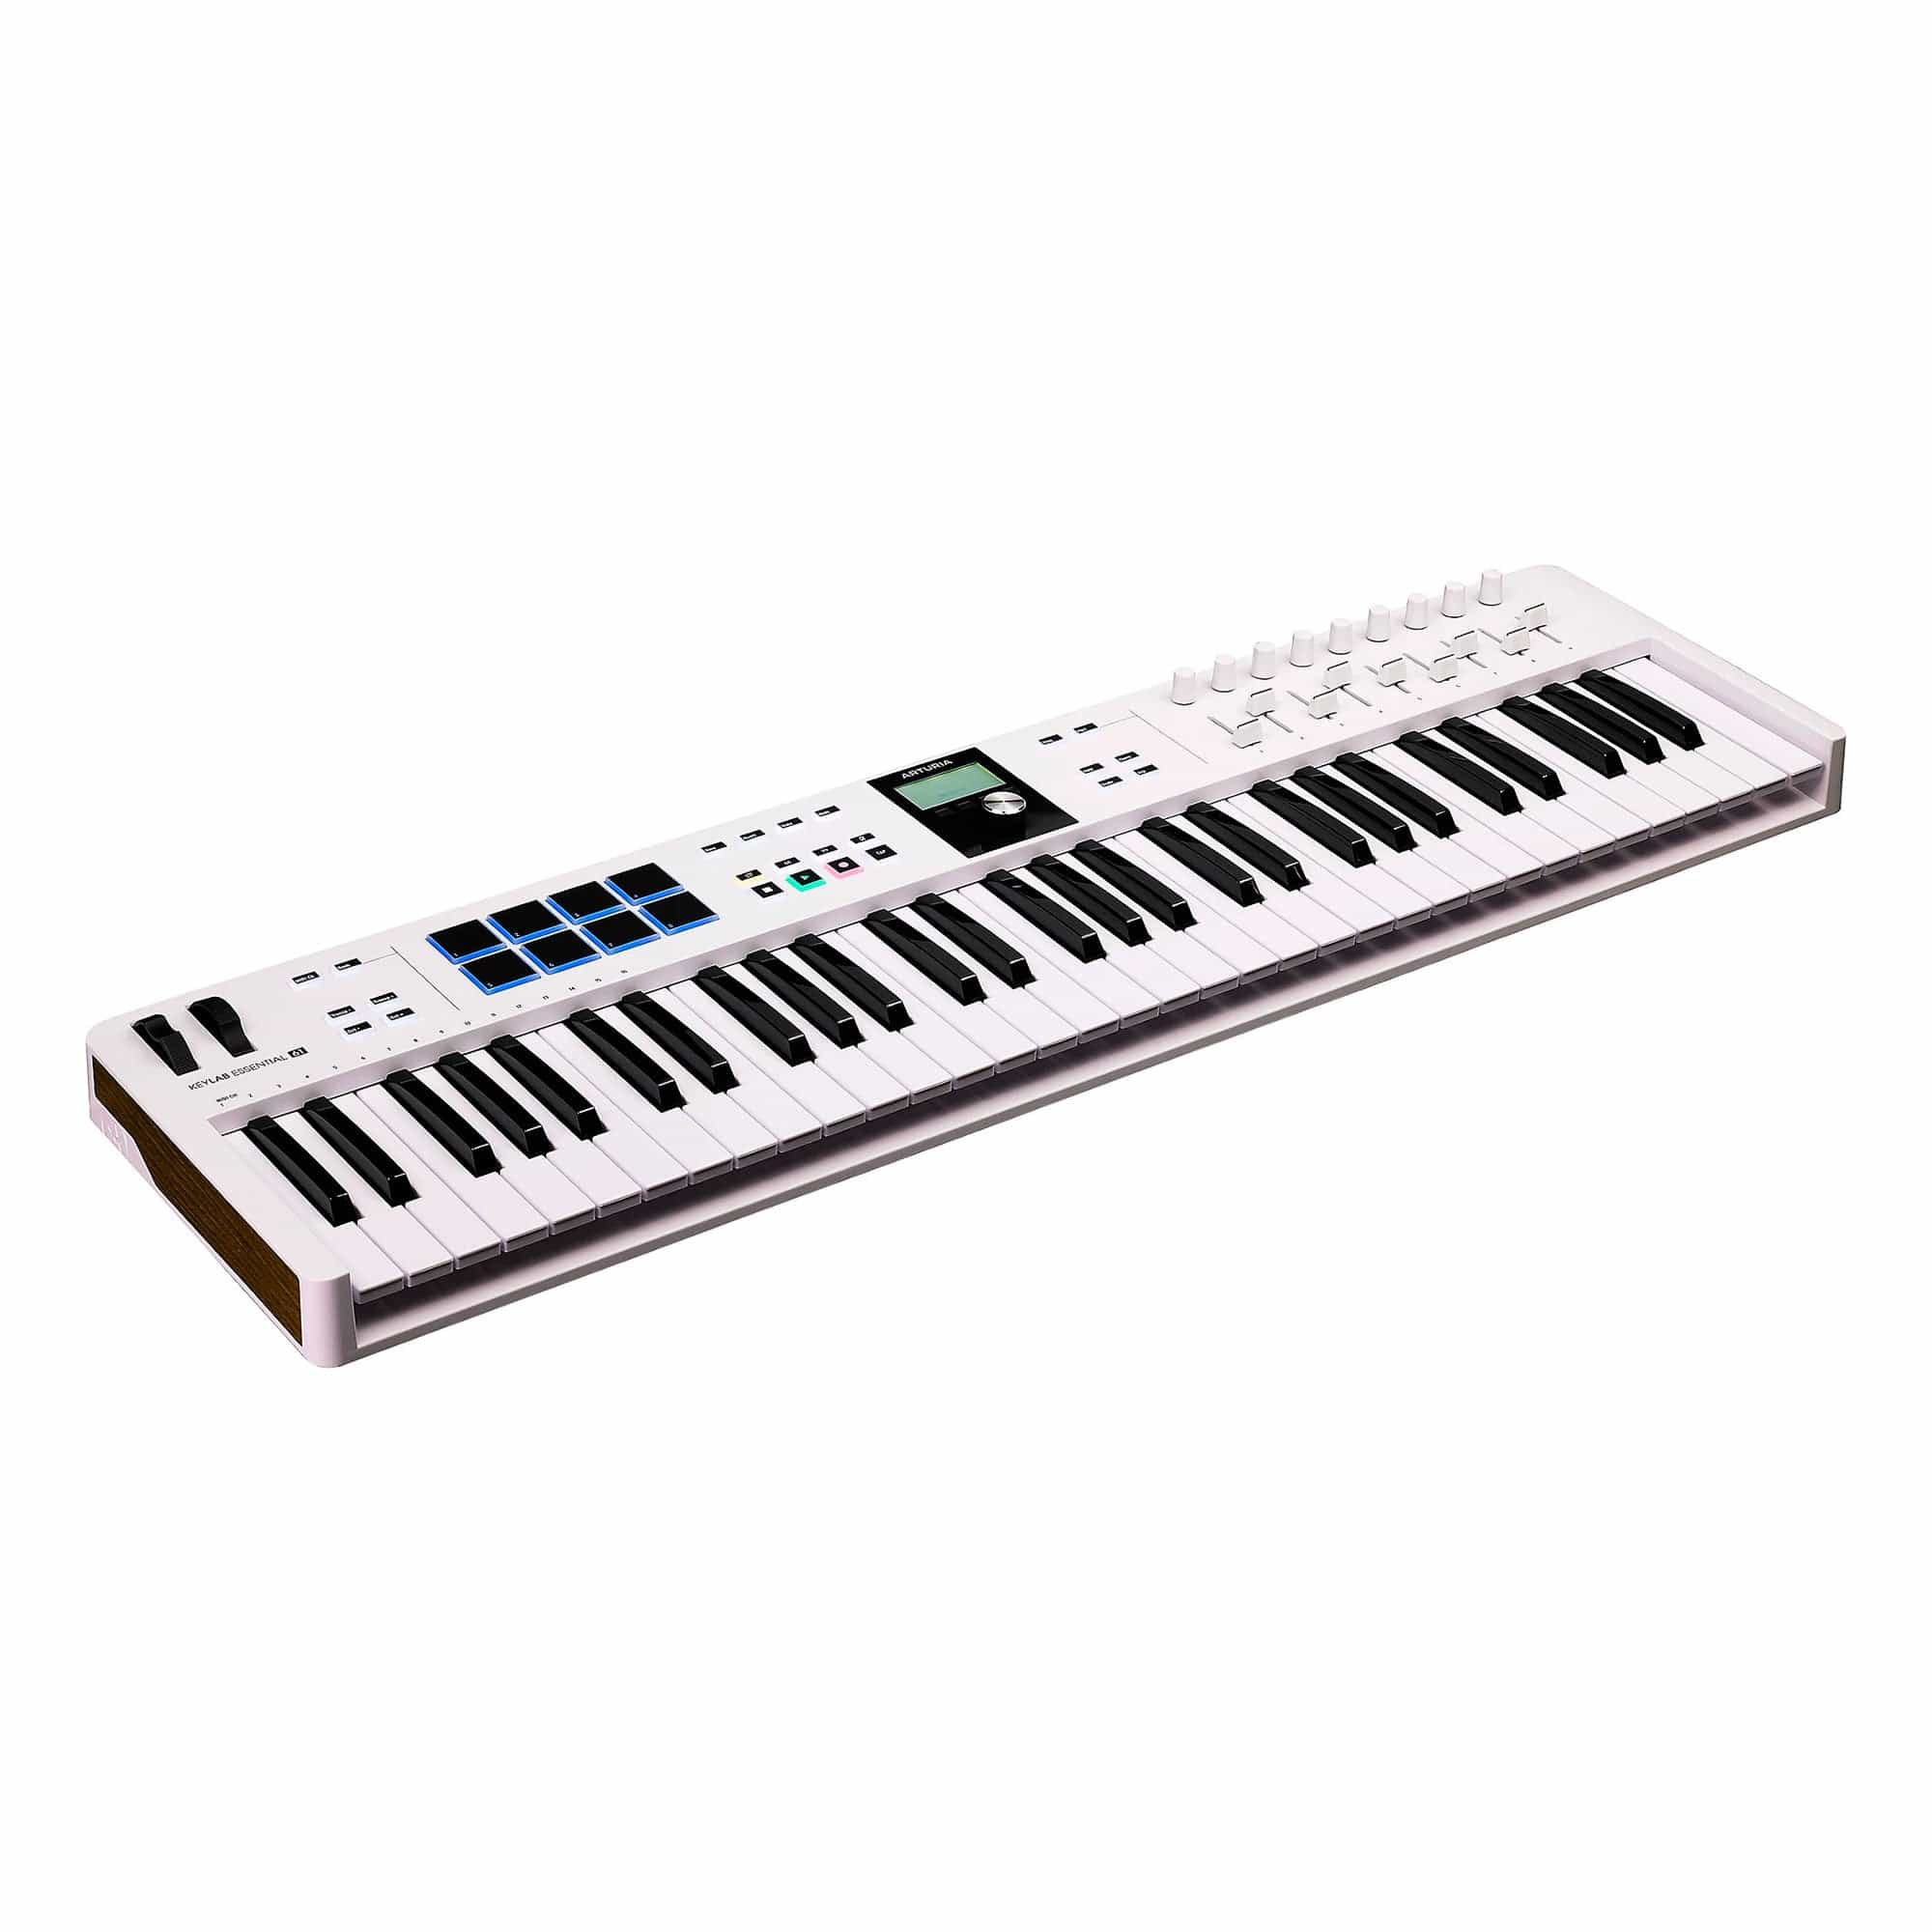 Arturia KeyLab Essential 61 MK3 MIDI Keyboard Controller White Effects and Pedals / Controllers, Volume and Expression